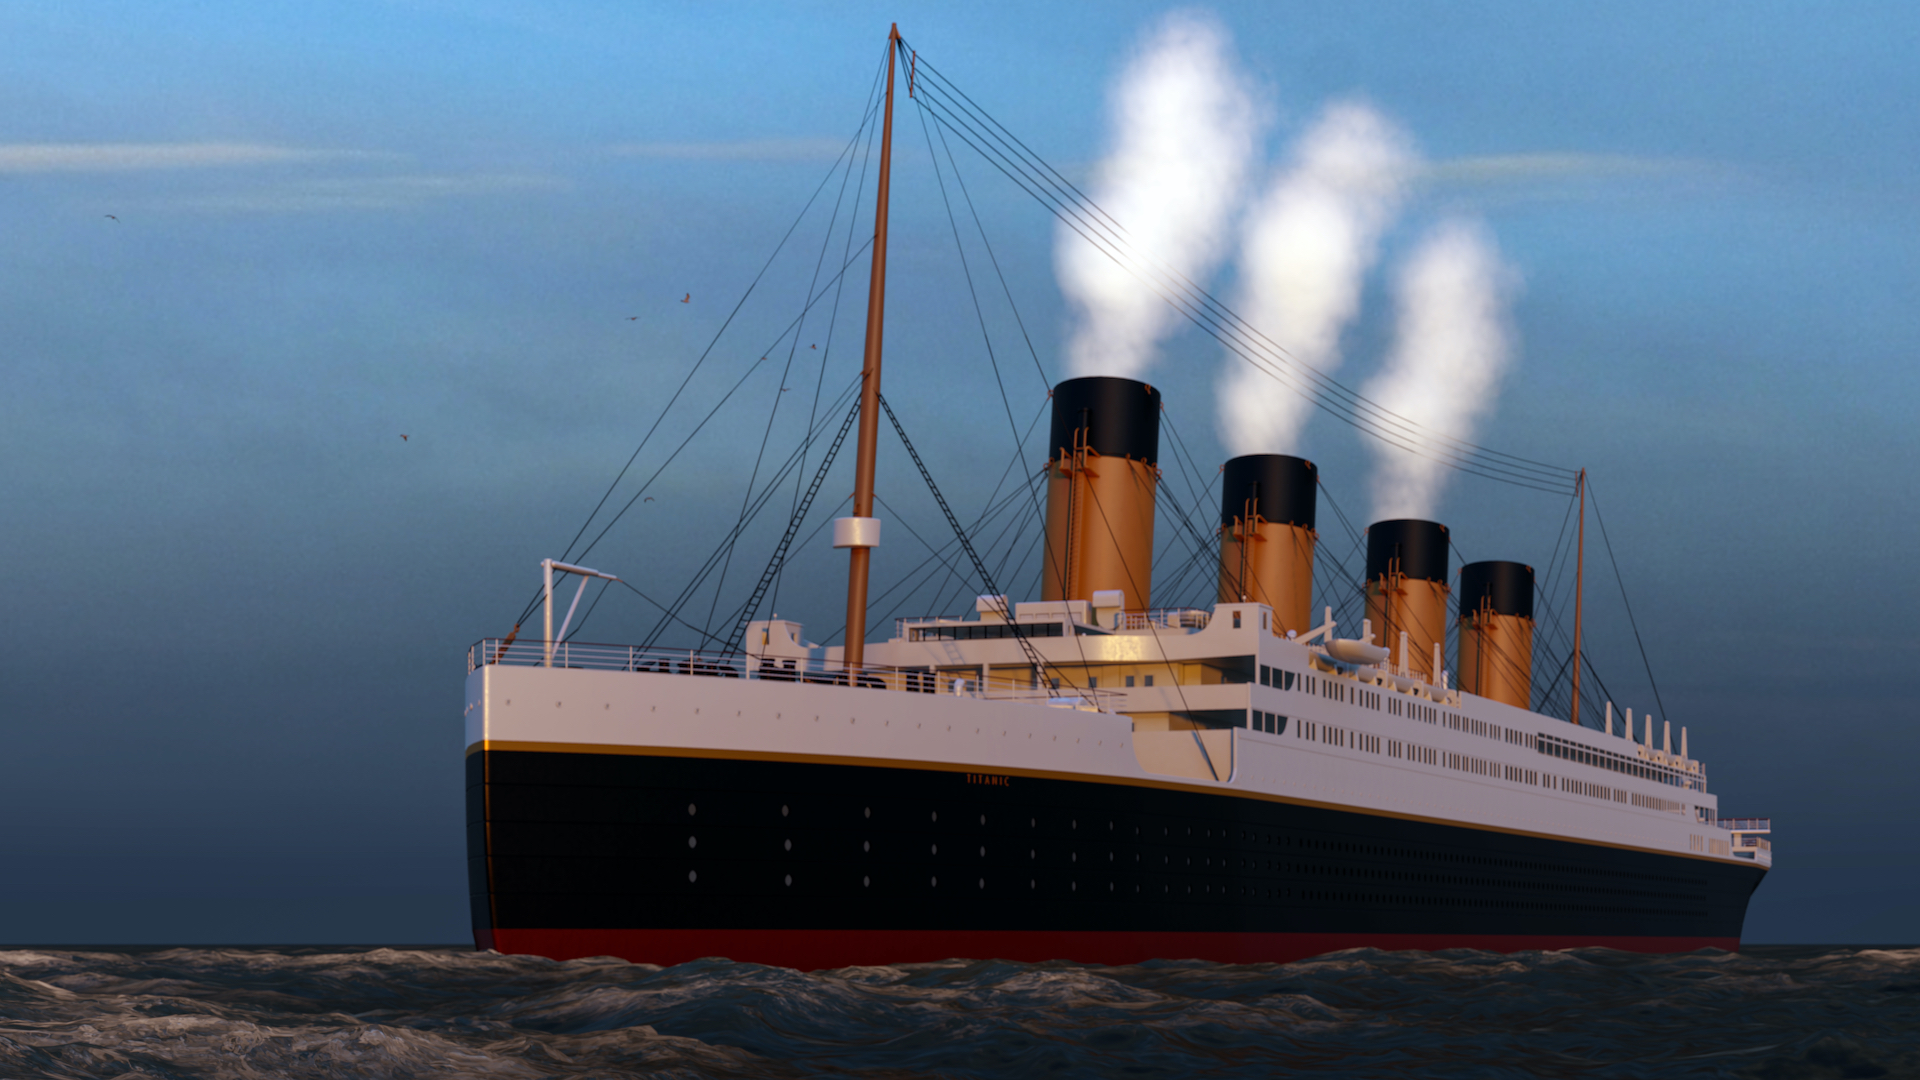 A 3D rendering of the Titanic